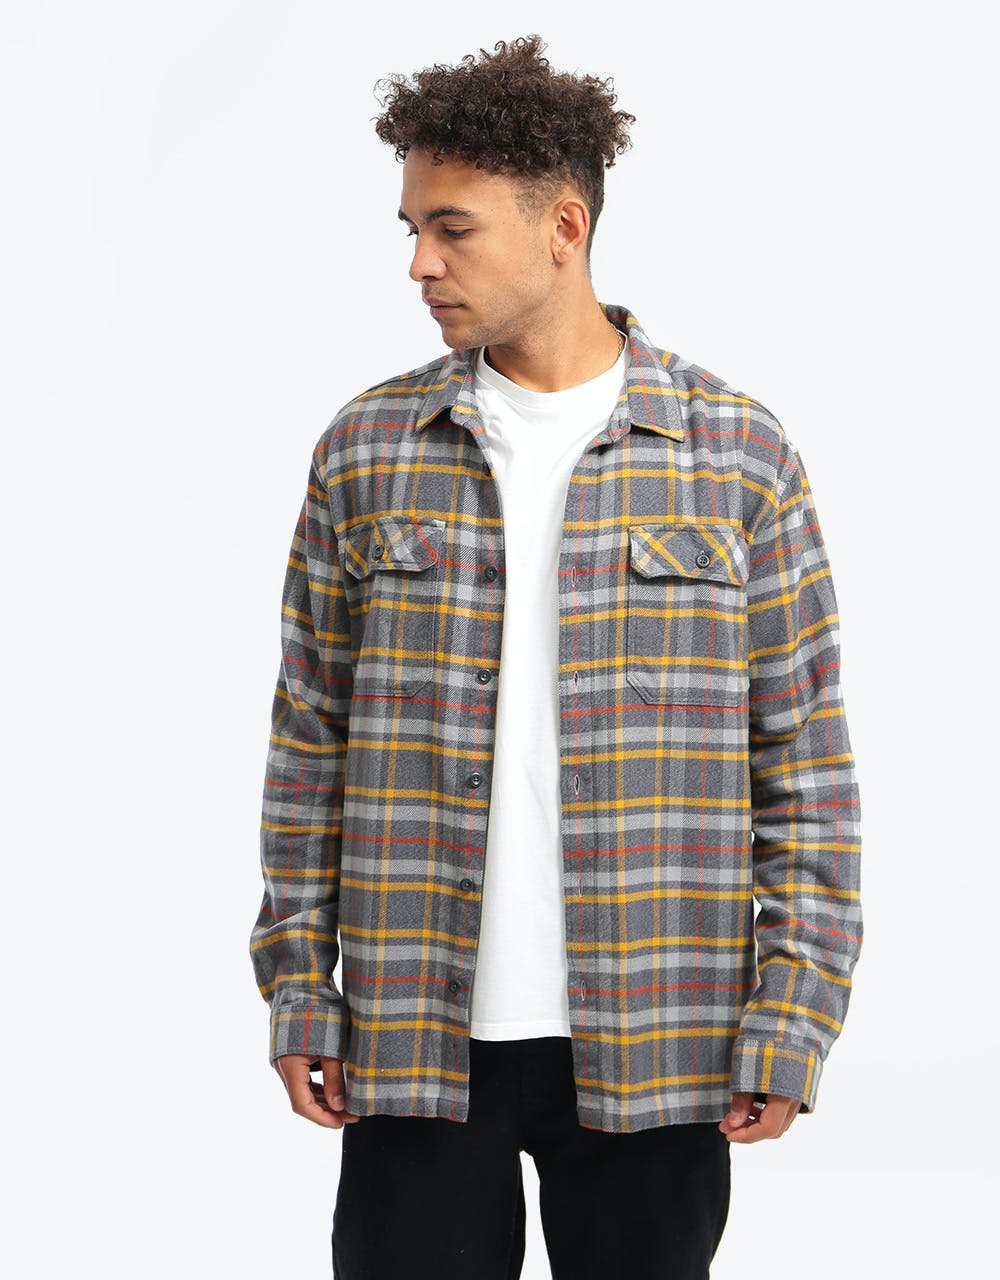 Patagonia Long-Sleeved Fjord Flannel Shirt - Independence: Forge Grey